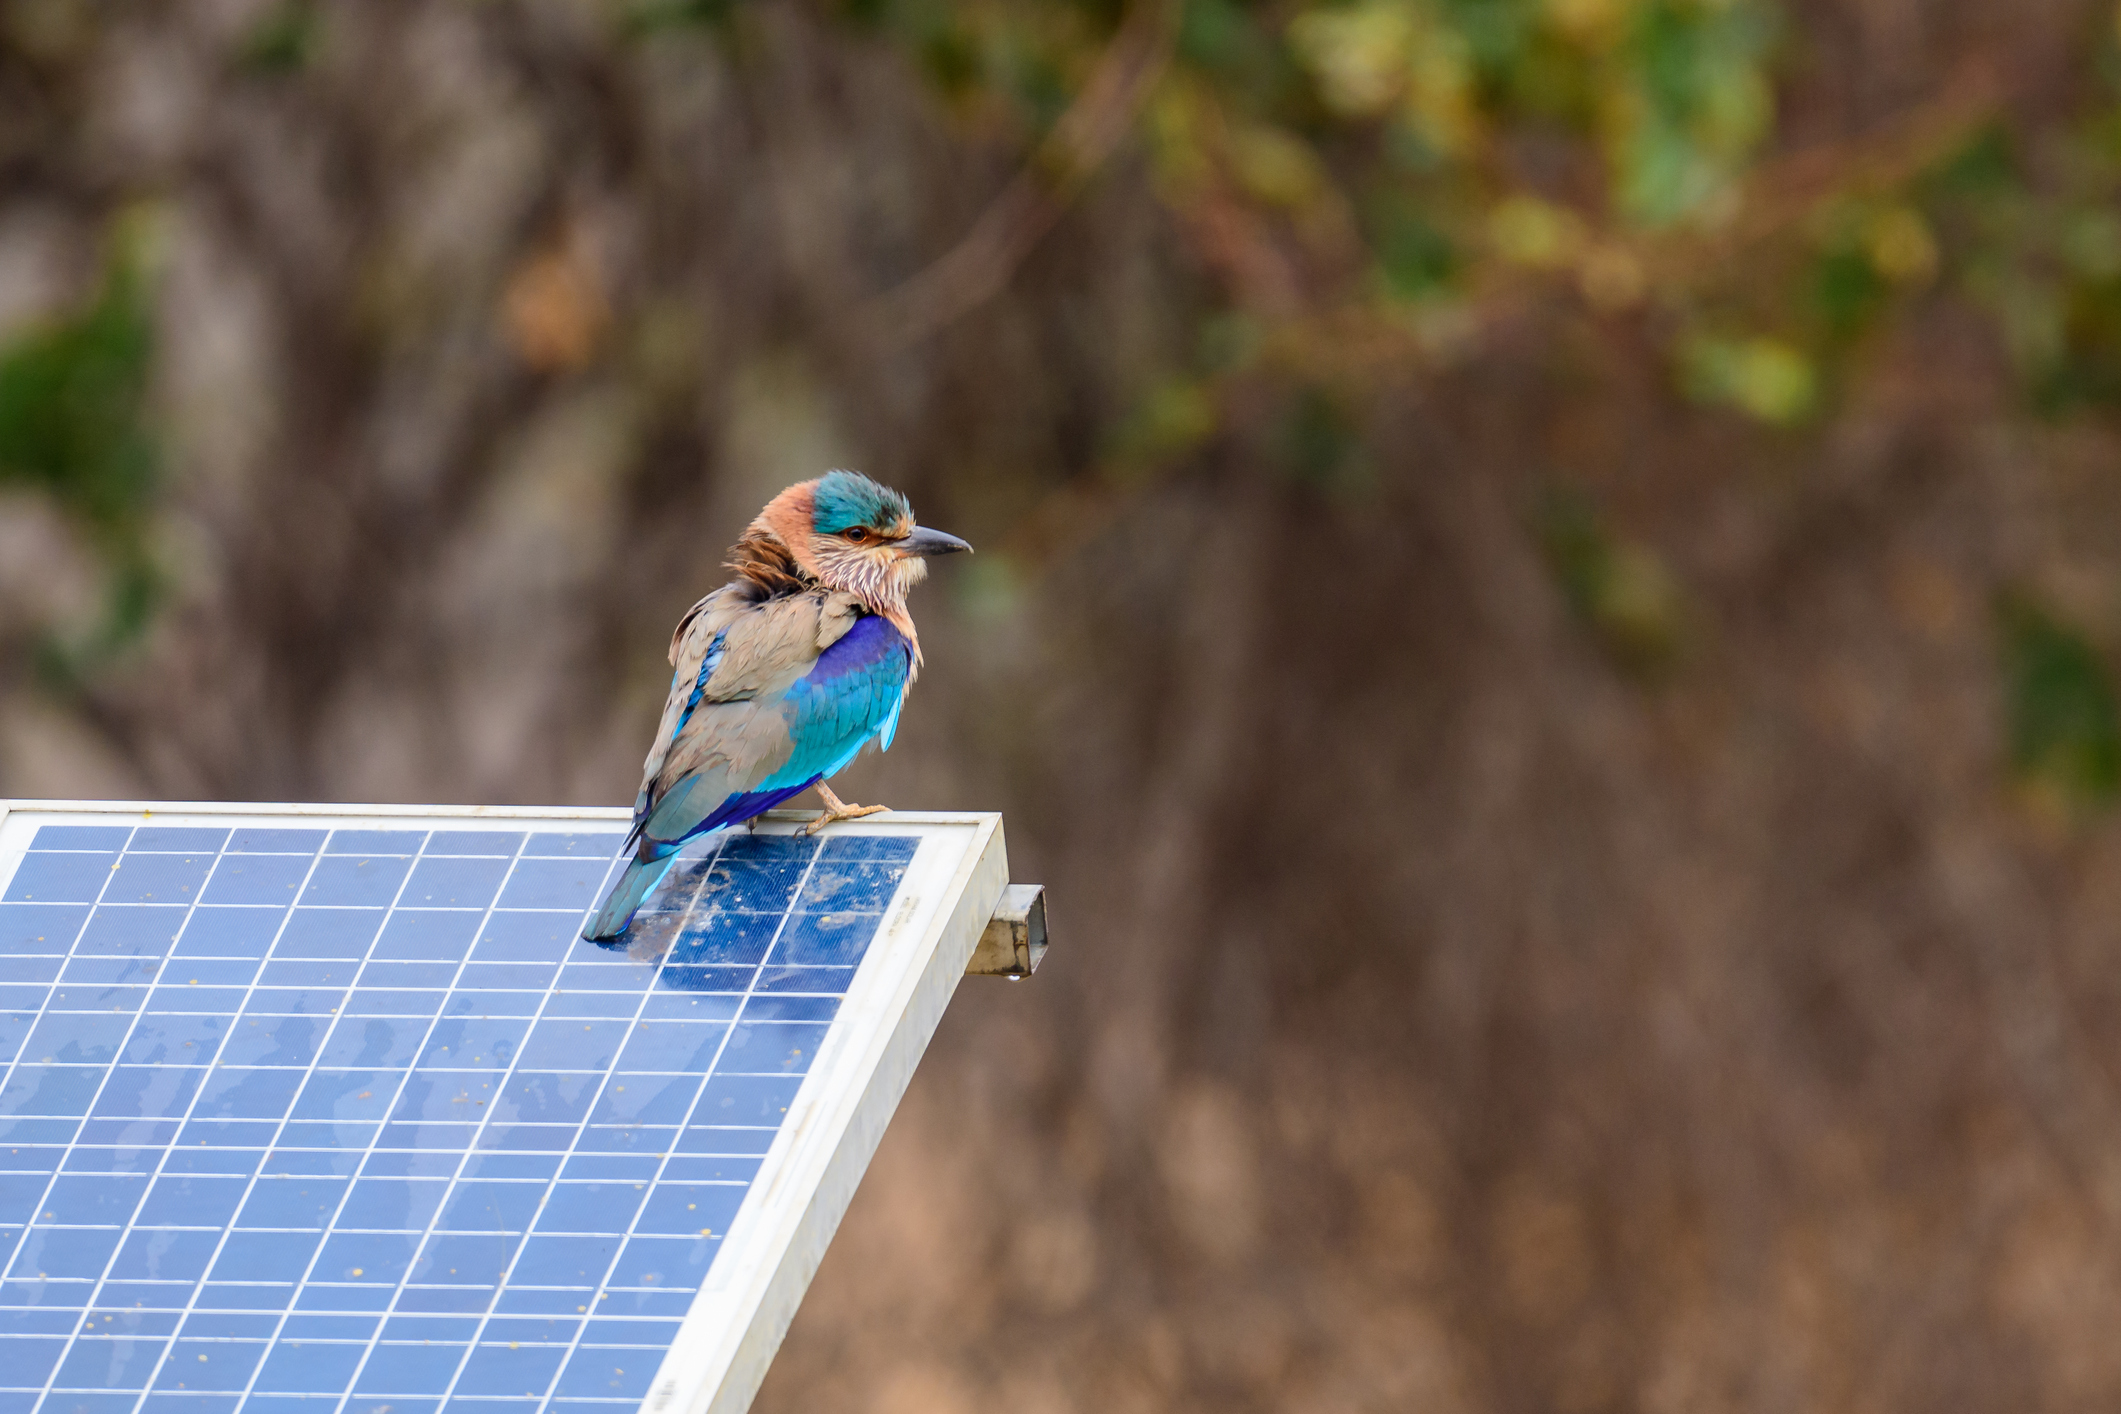 A Bird sitting on top of a solar panel.